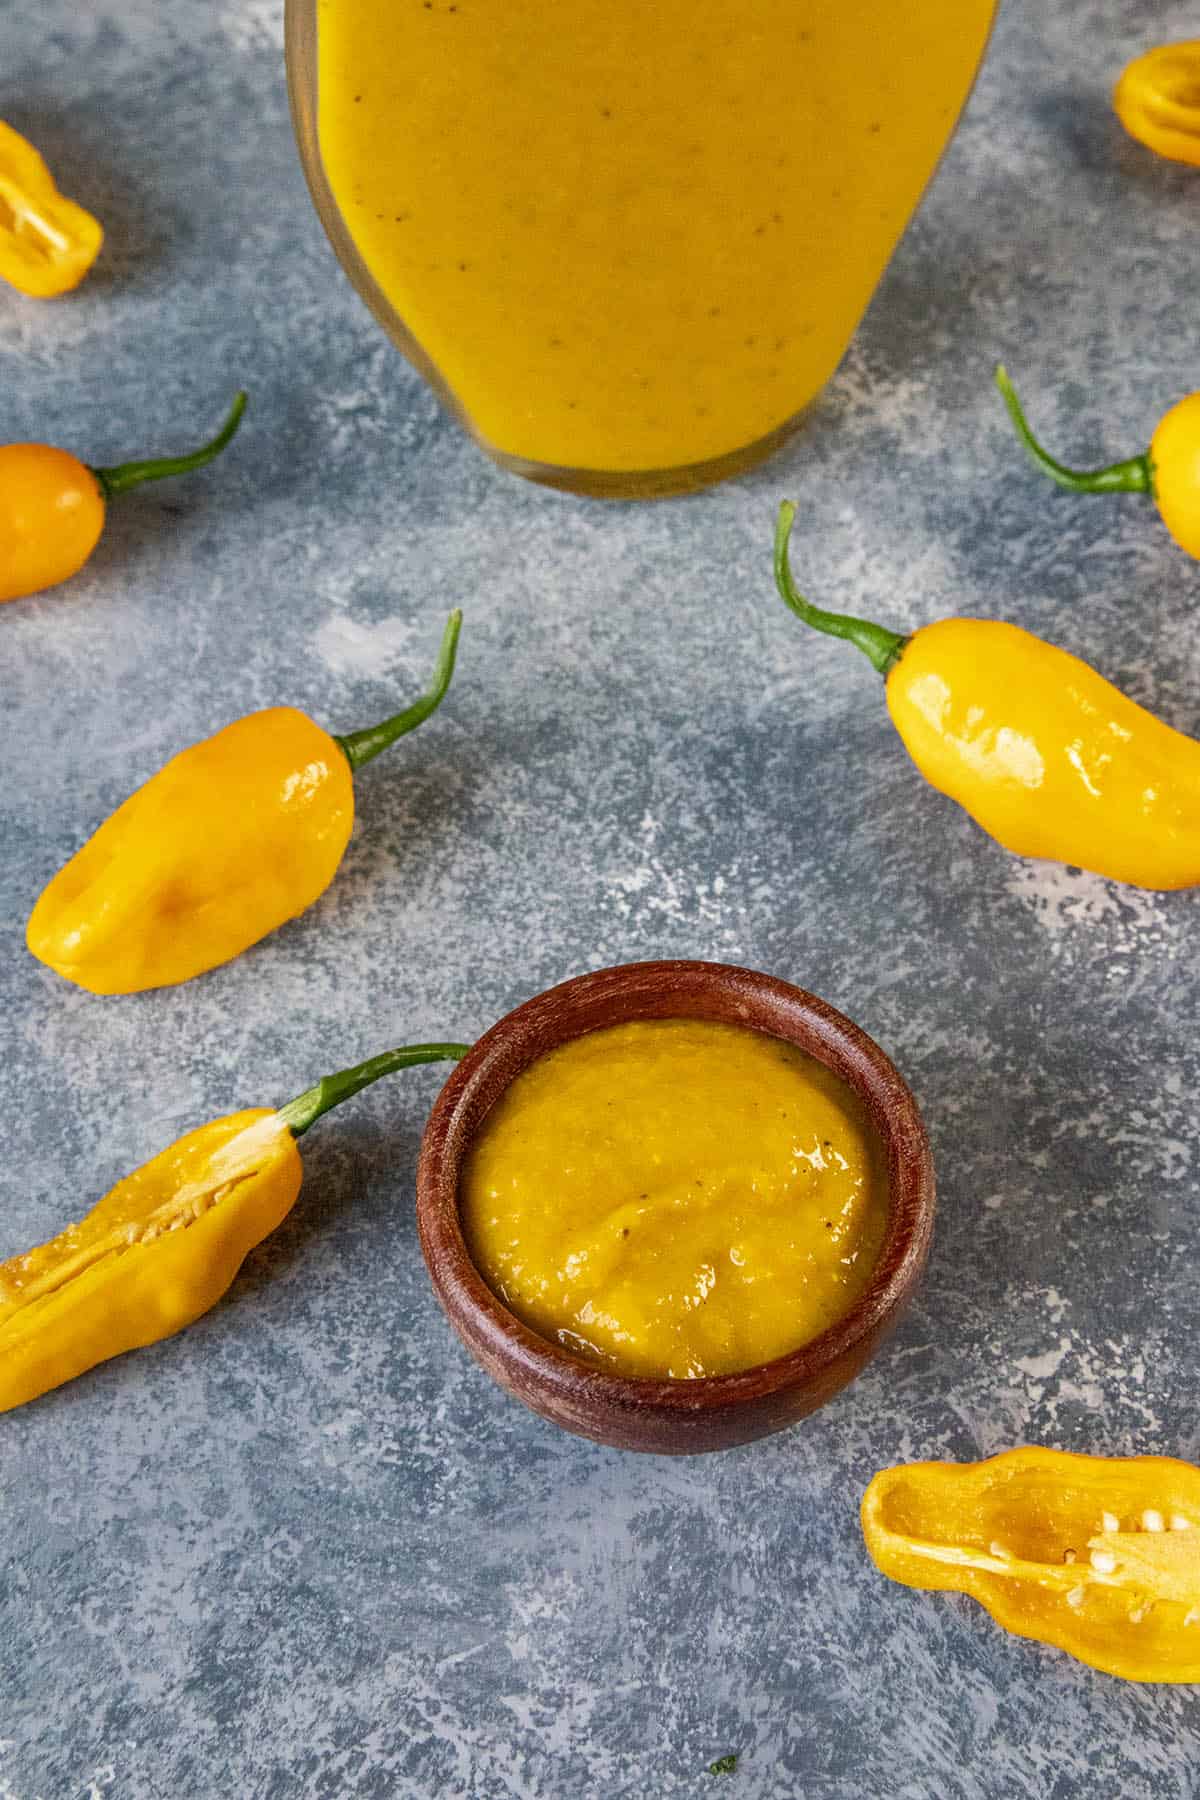 Devils Tongue Hot Sauce in a small bowl, very vibrant yellow in color